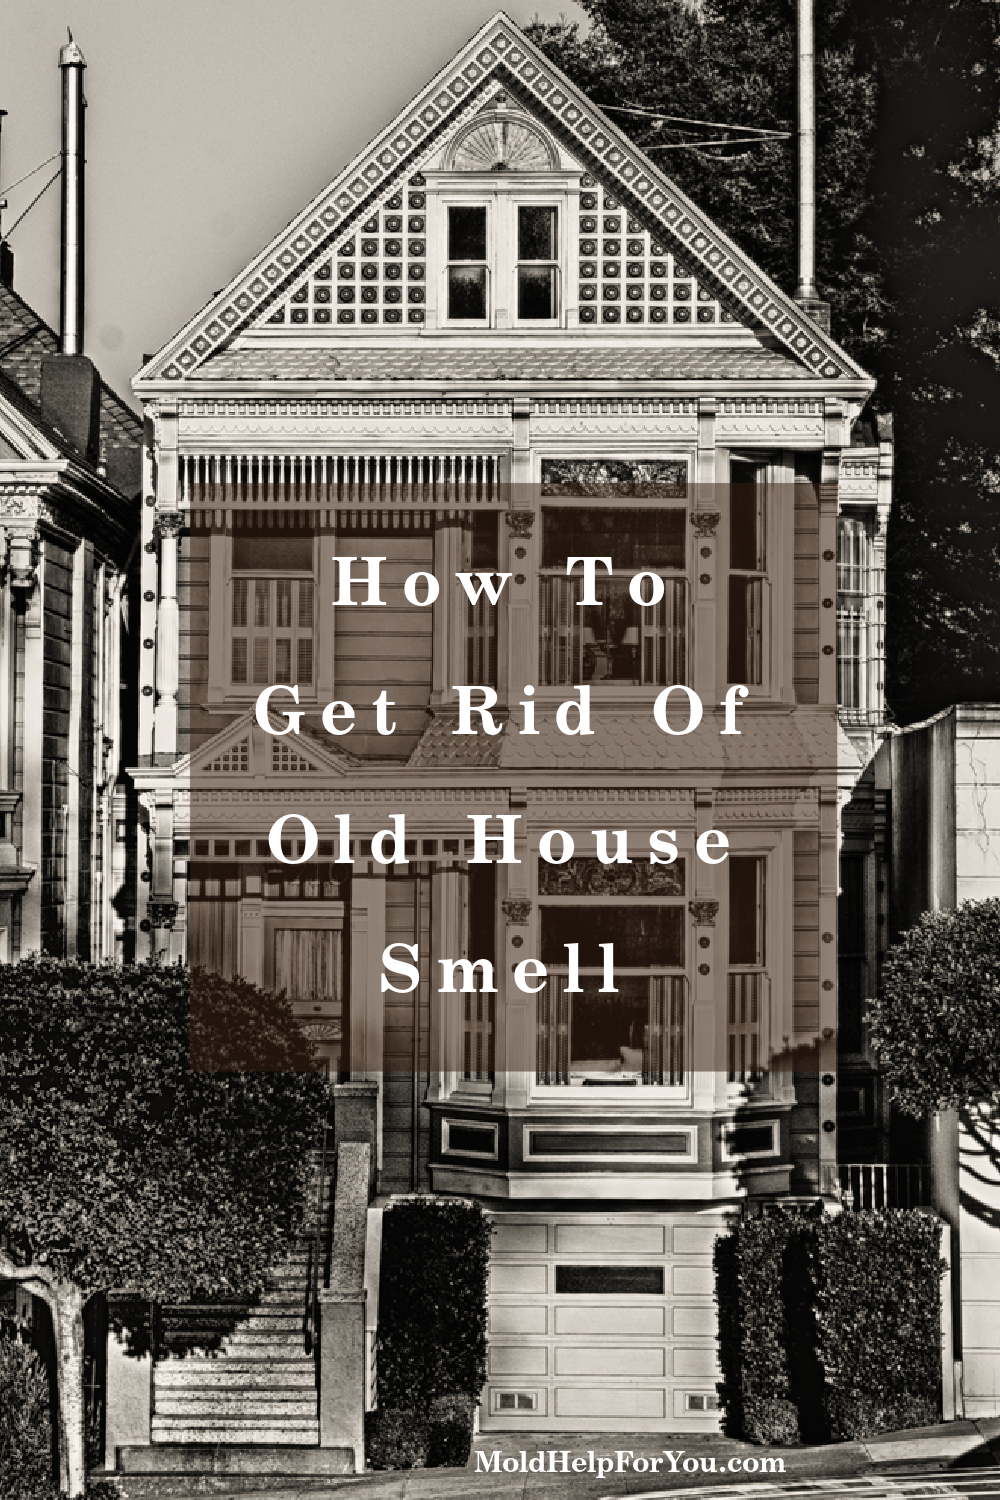 A black and white photo of an old Victorian home with the overlay of "how to get rid of old house smell."